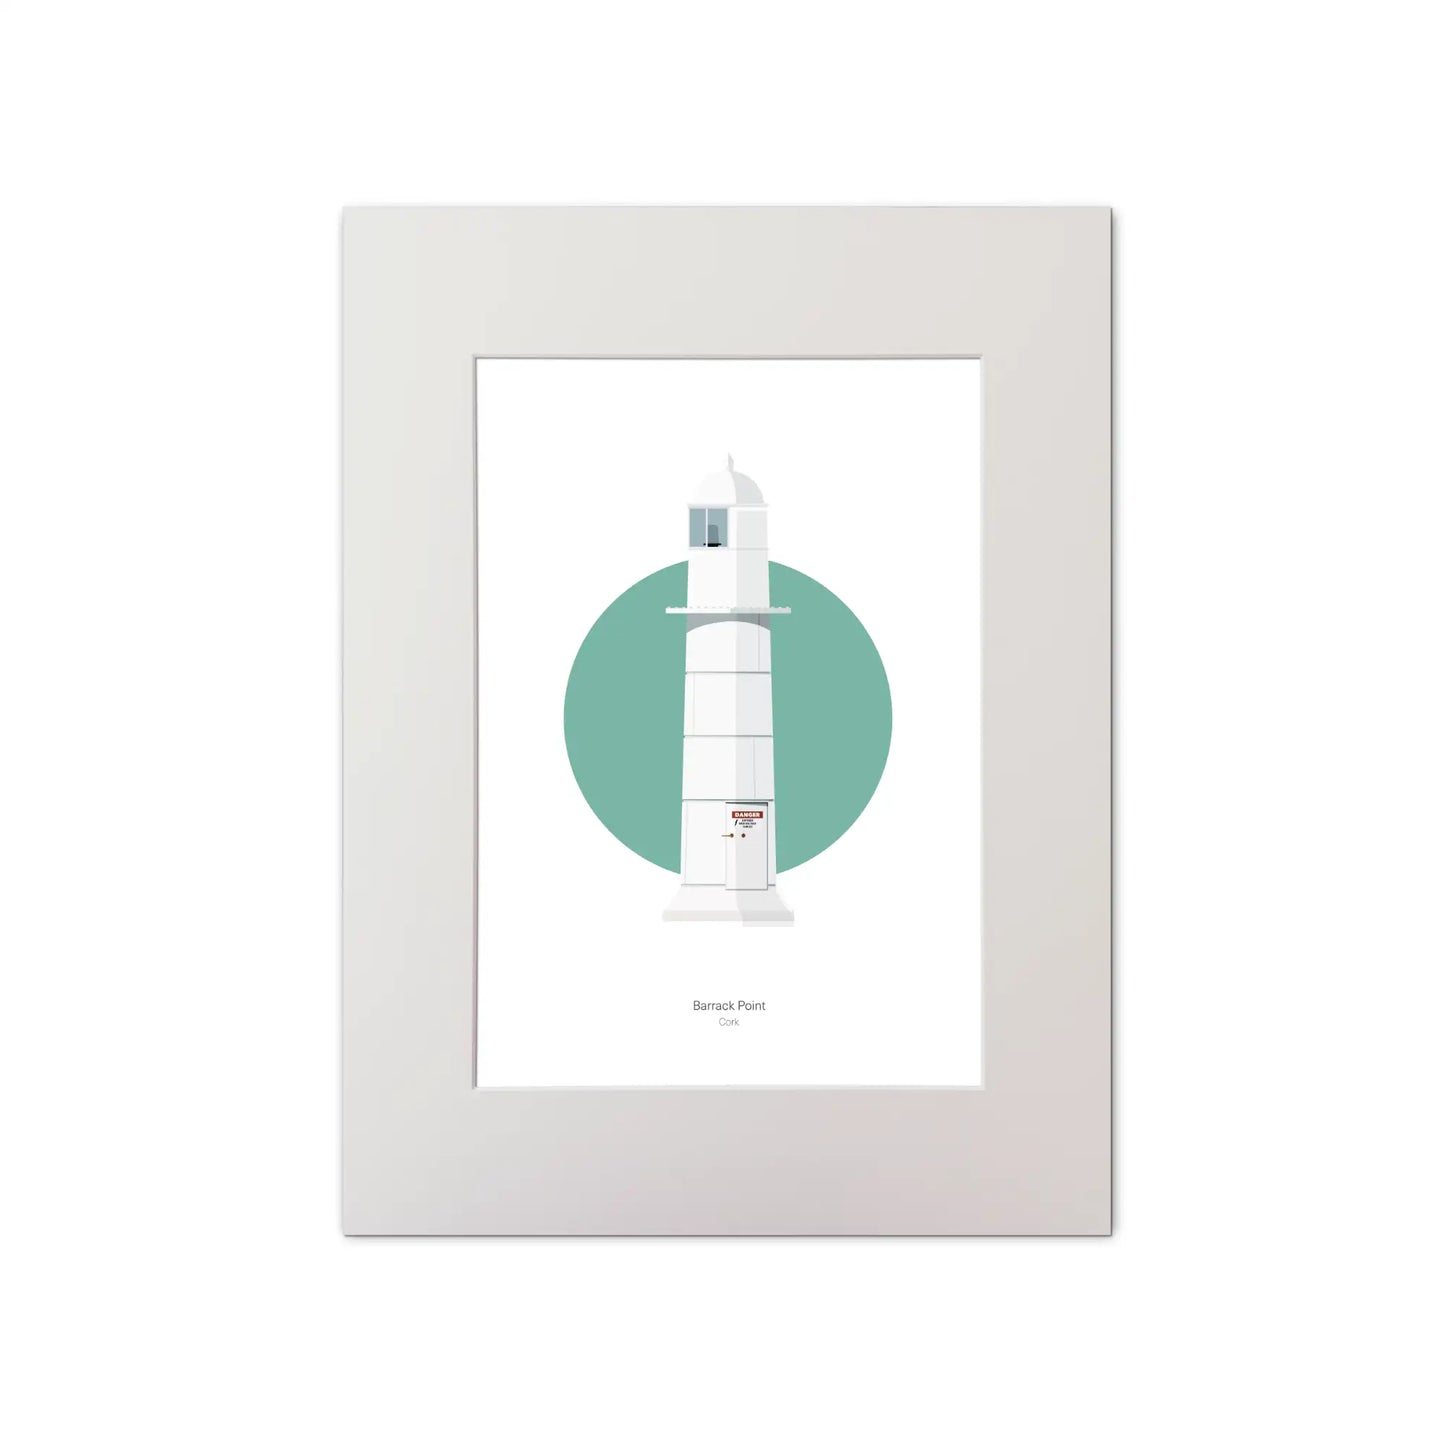 Contemporary graphic illustration of Barrack Point lighthouse on a white background inside light blue square, mounted and measuring 30x40cm.